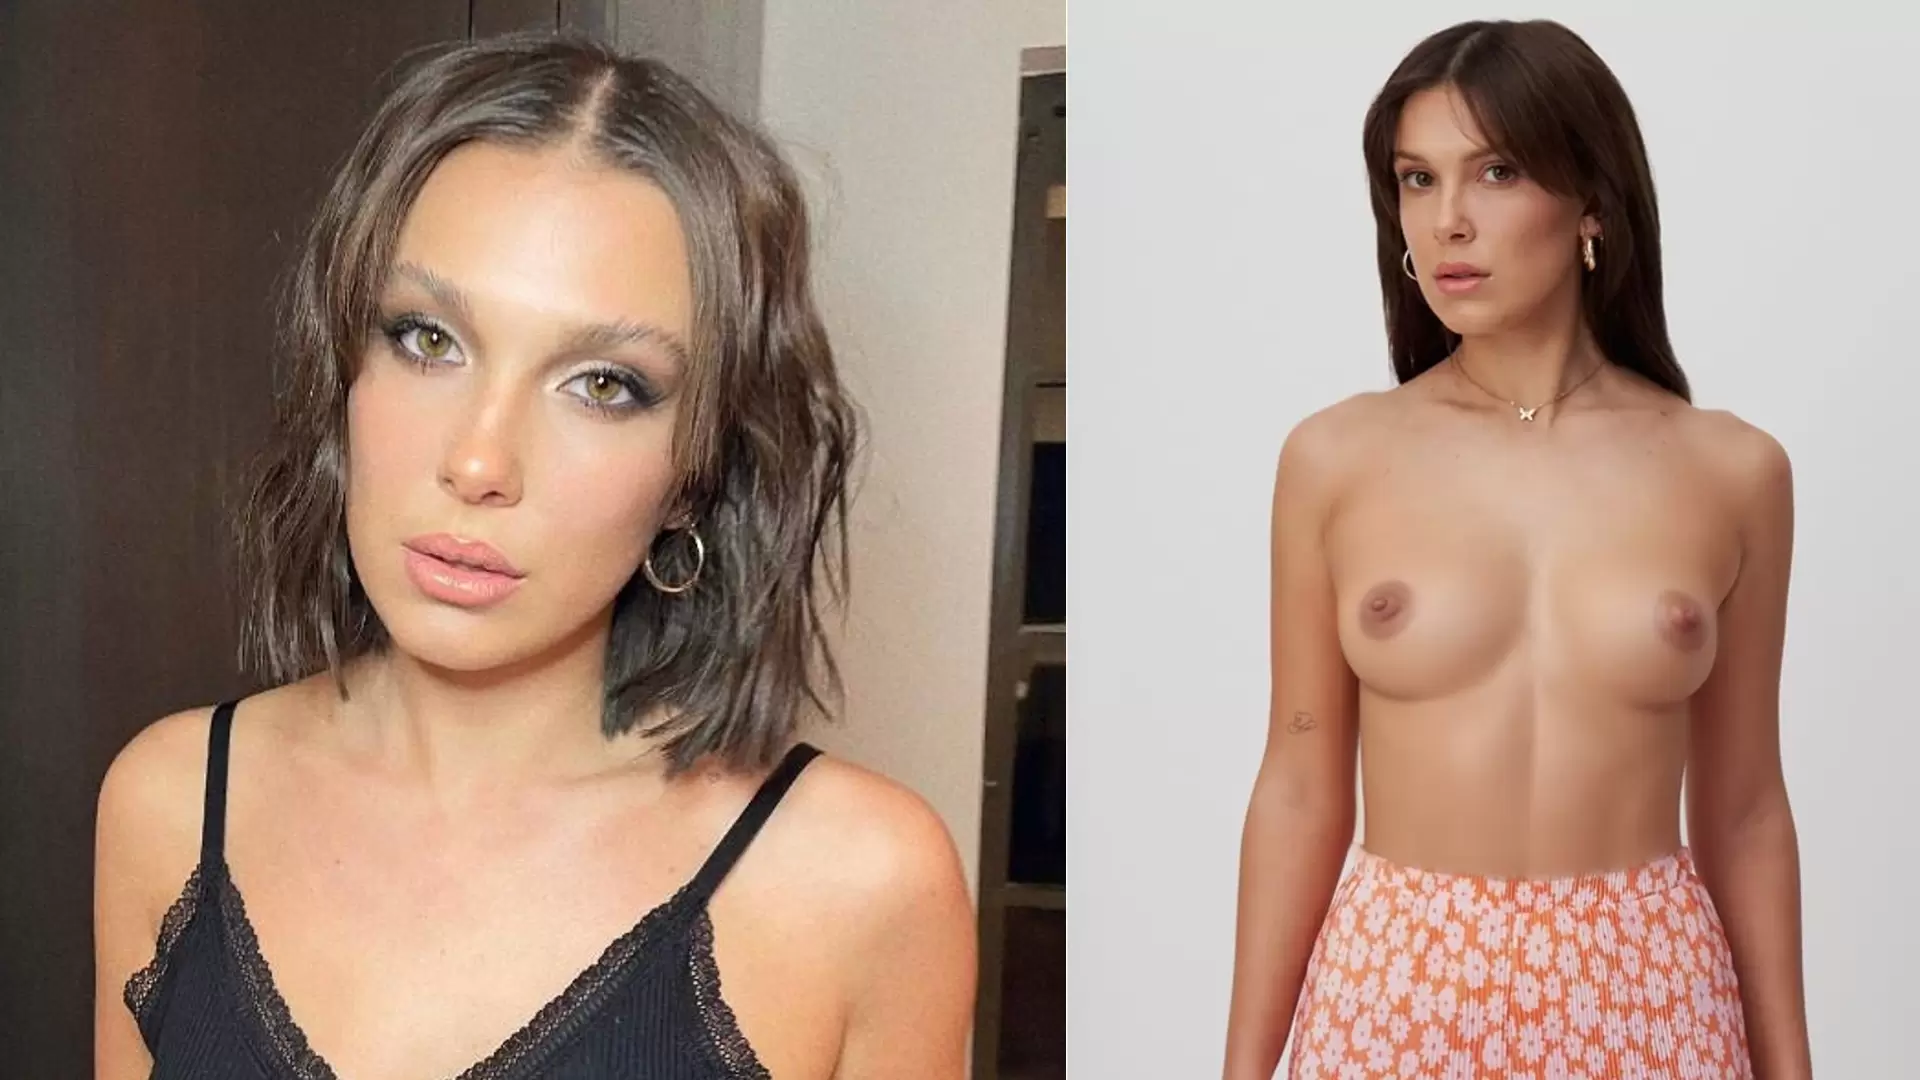 Brown Nude Breasts - Millie Bobby Brown leaked Nudes (Boobs, Ass & Topless) (2023)